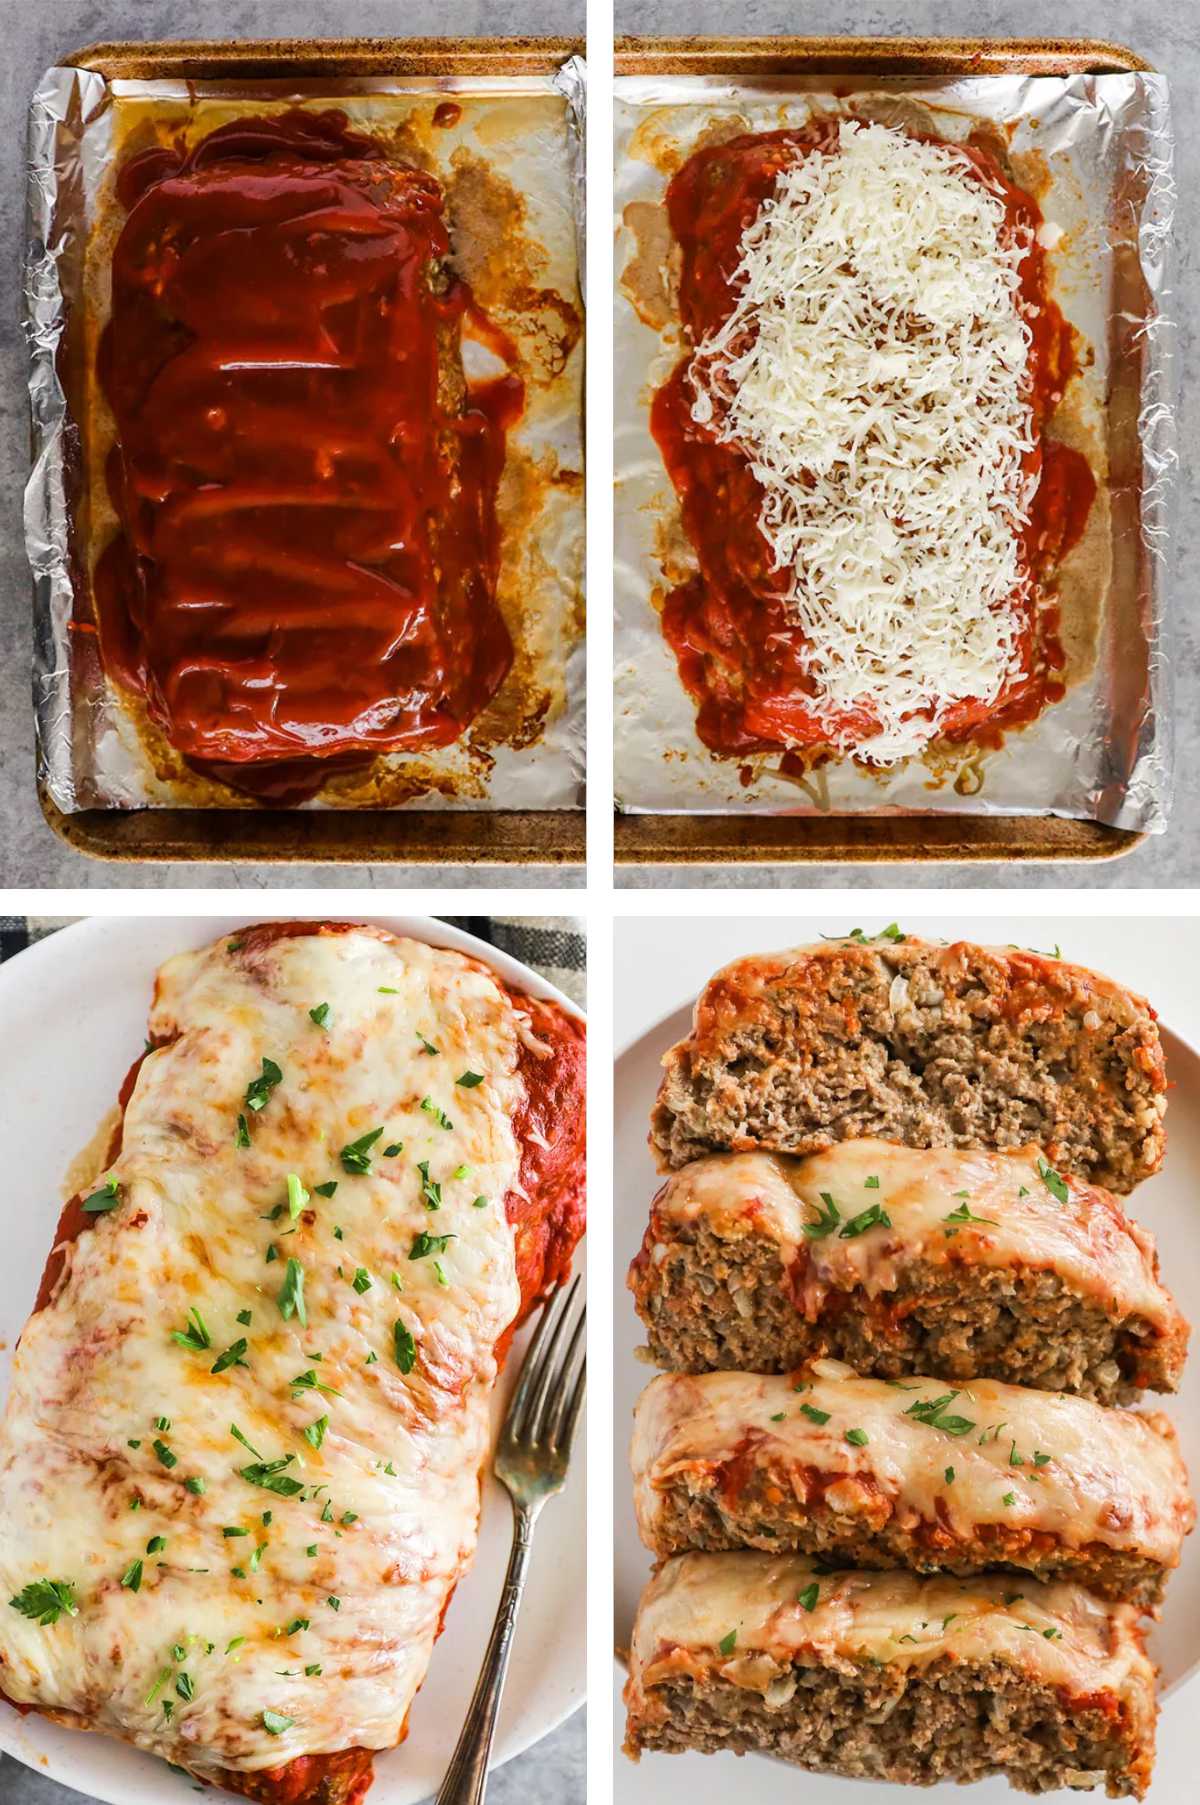 Four images: 1. Cooked loaf with spaghetti sauce. 2. Cheese added on top spaghetti cause. 3. Finished and baked loaf with melted cheese. 4. Finished loaf sliced into four sections. 